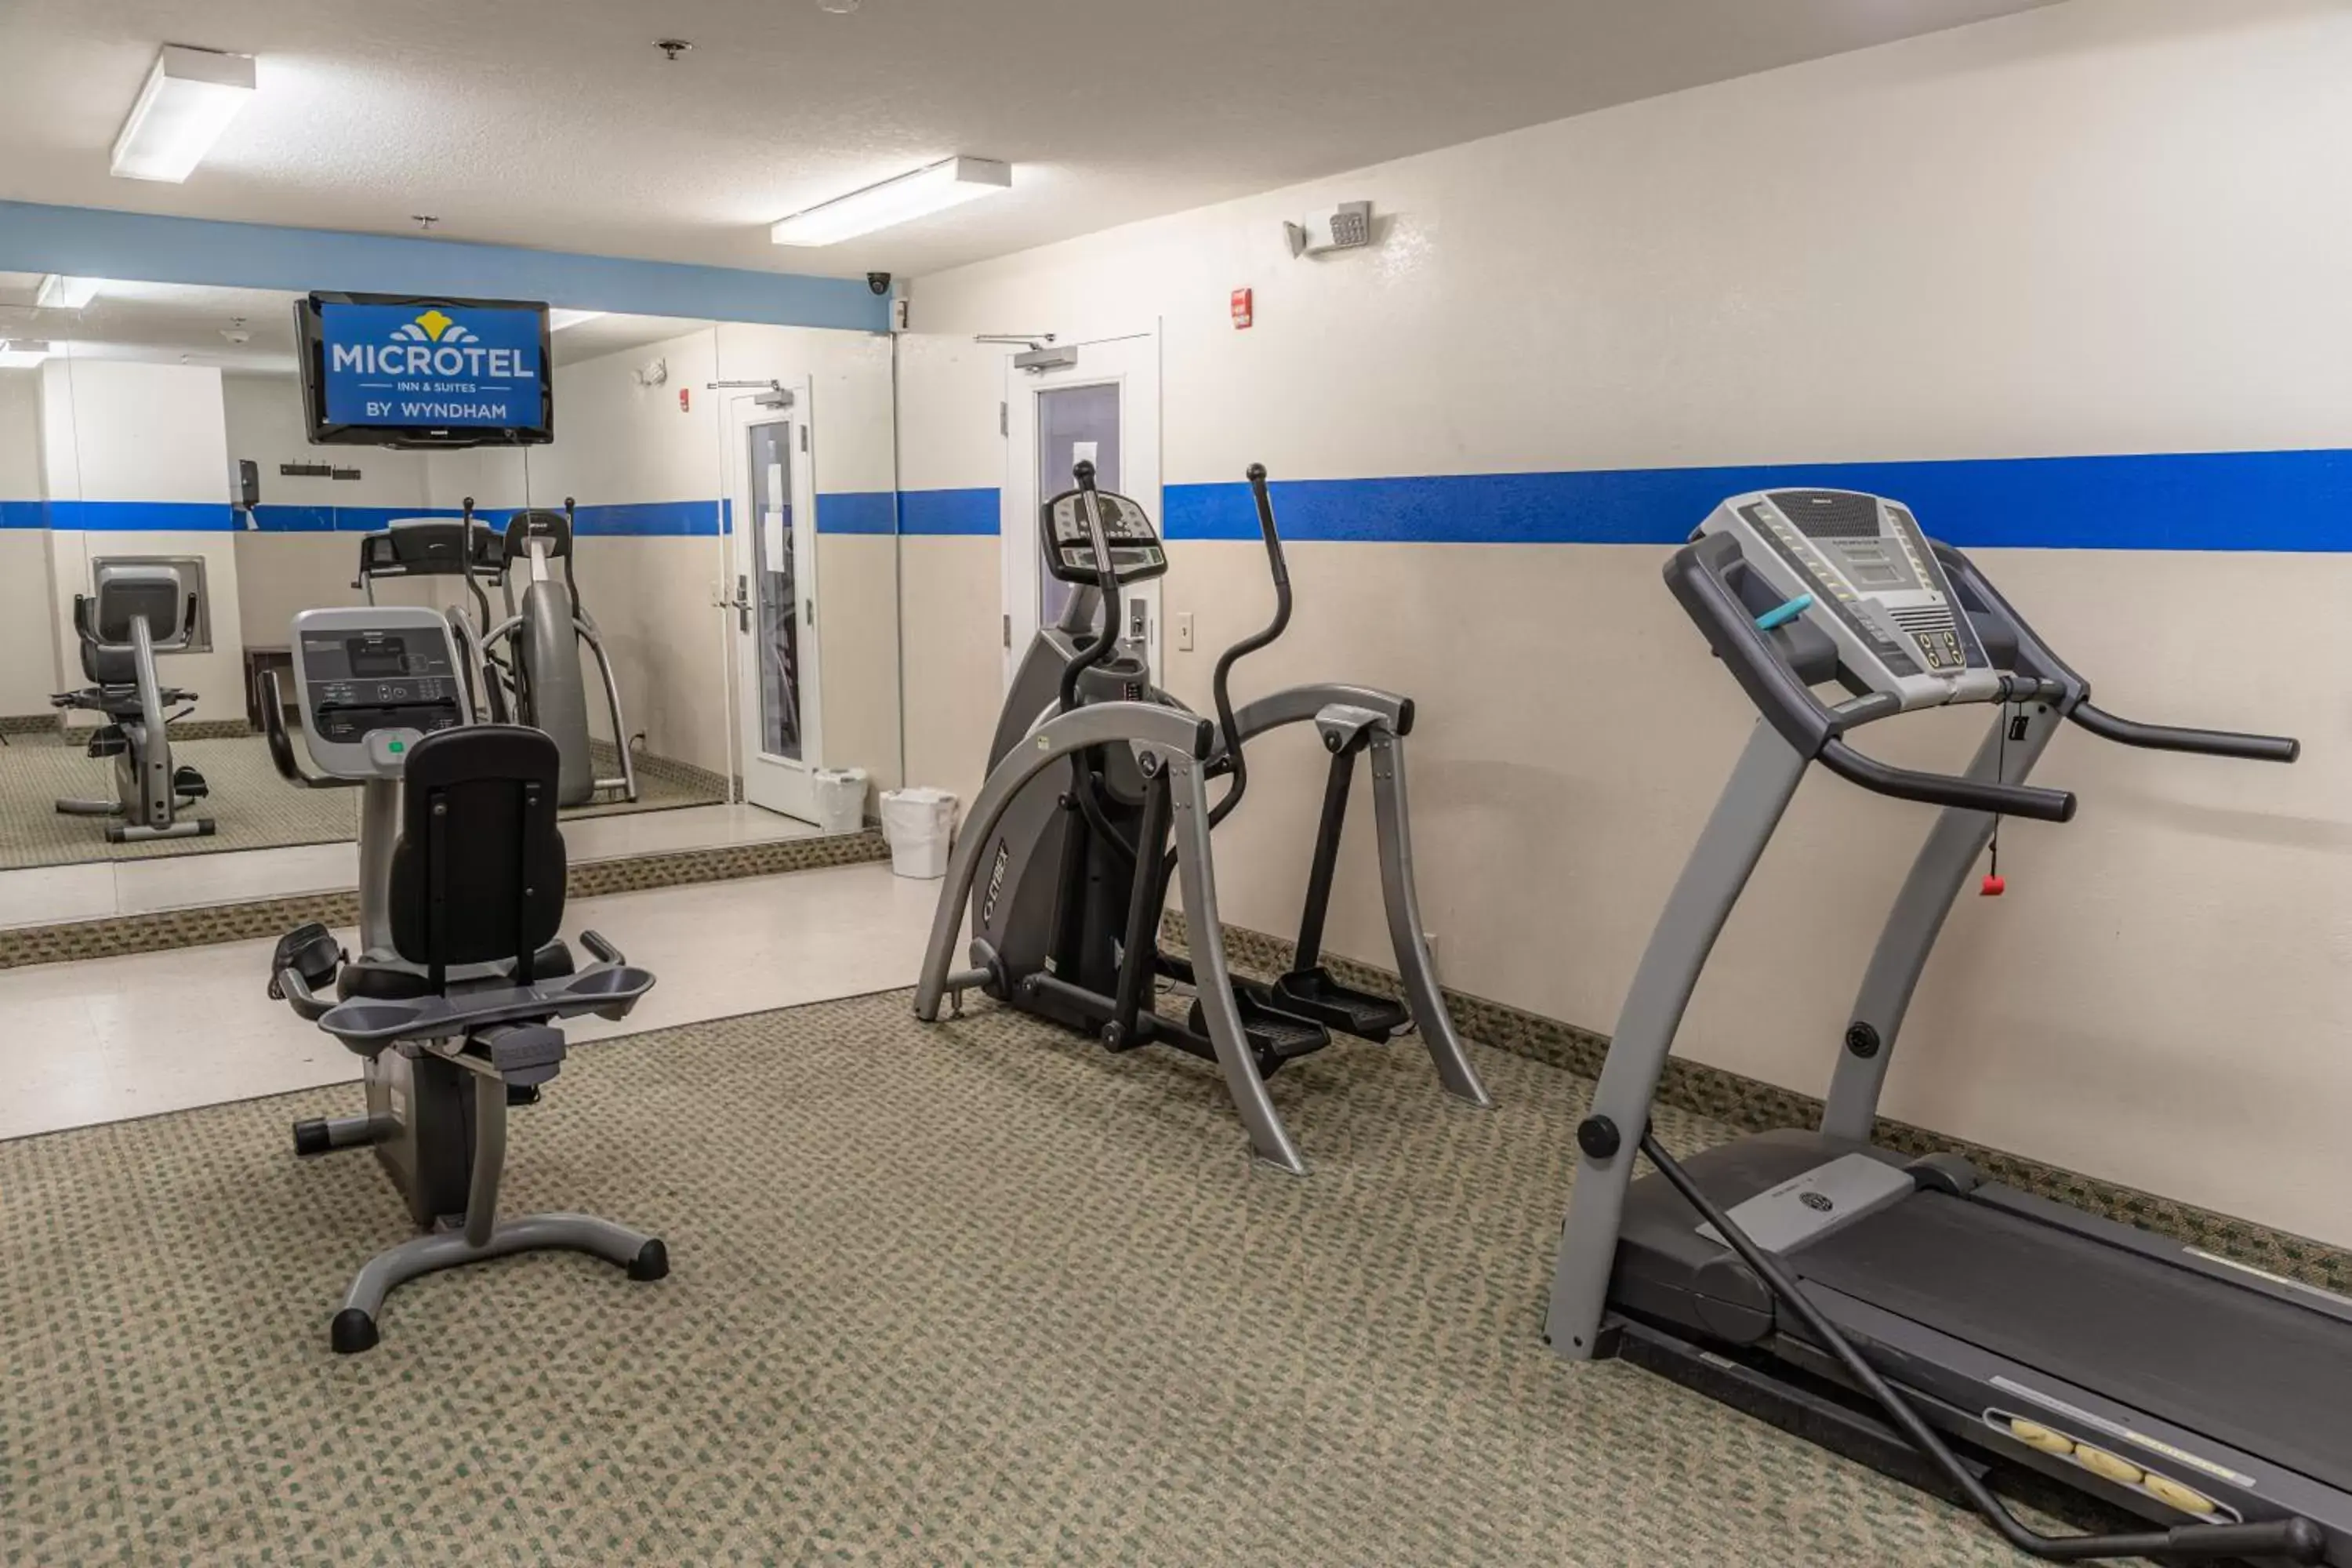 Fitness centre/facilities, Fitness Center/Facilities in Microtel Inn & Suites by Wyndham Kingsland